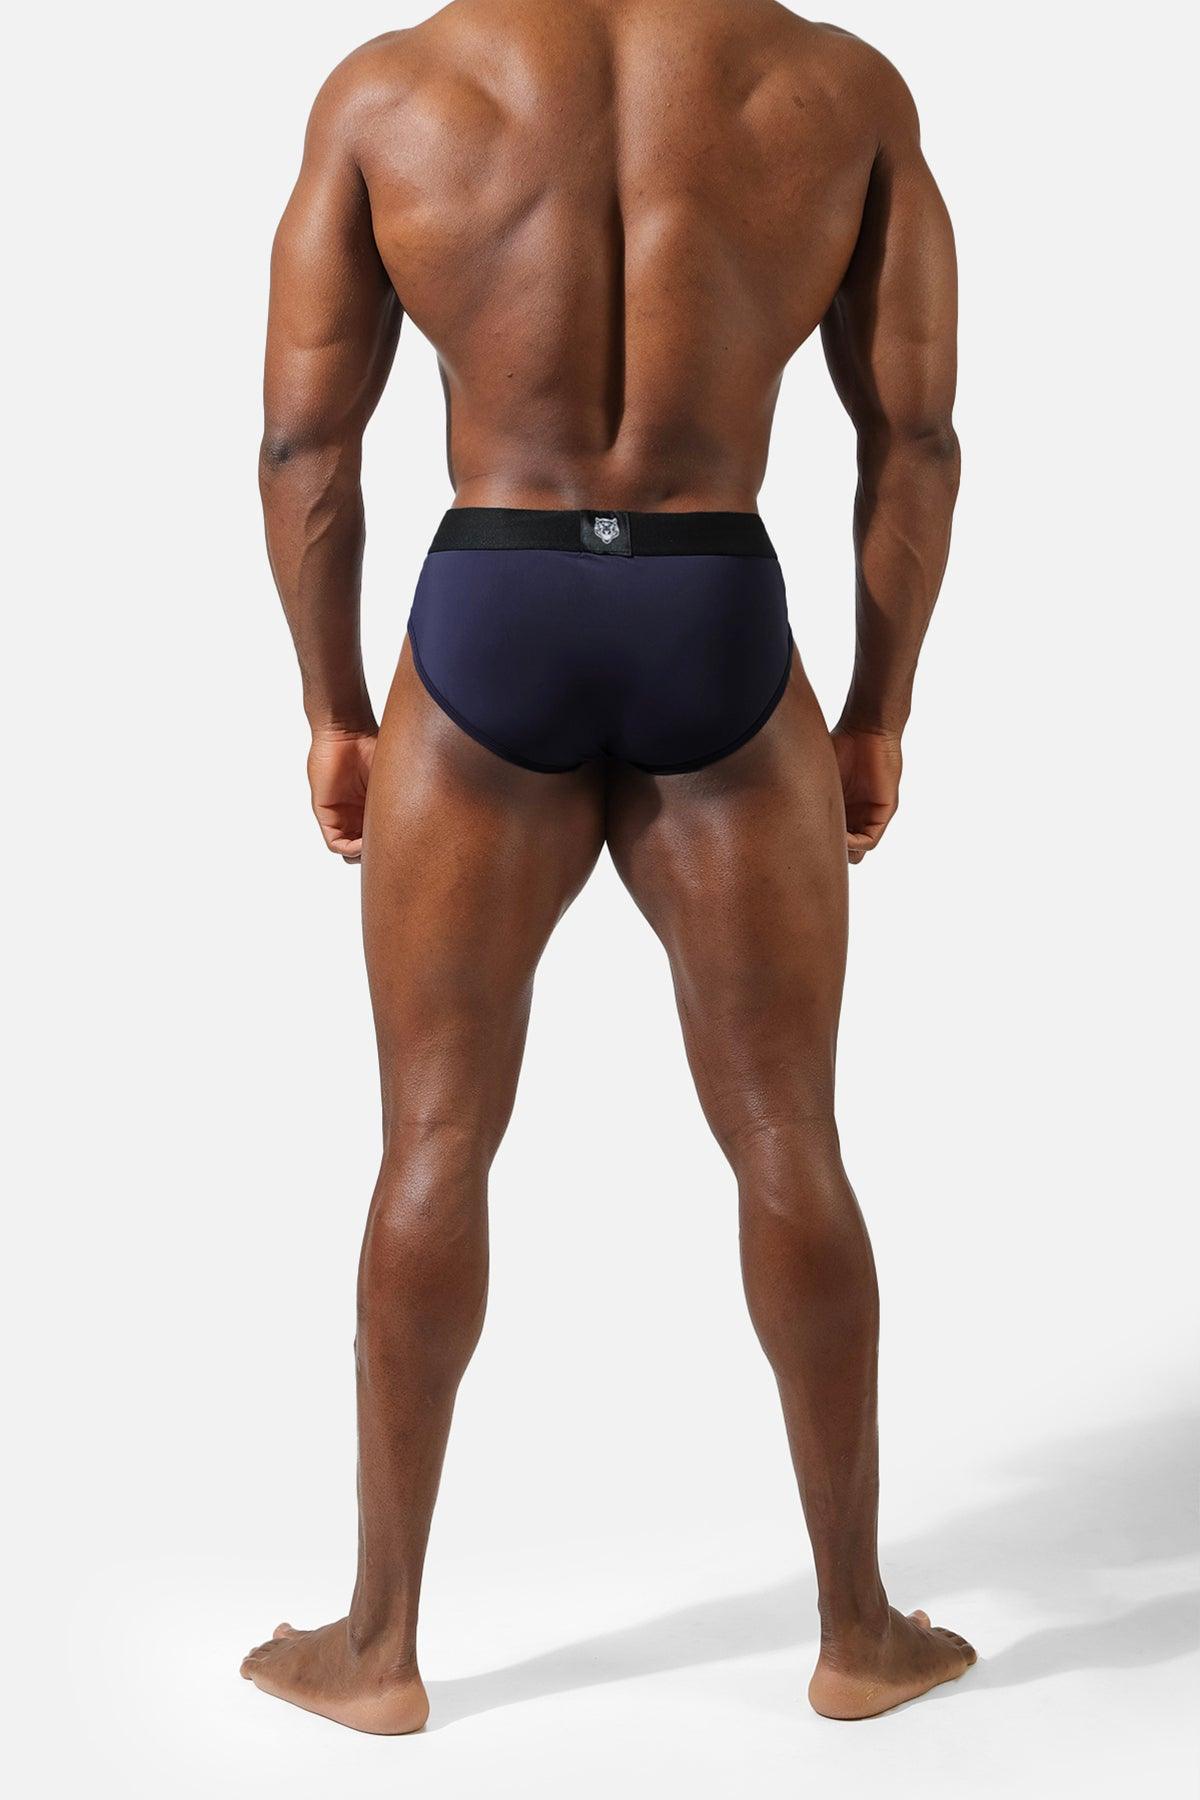 Men's Workout Mesh Briefs 2 Pack - Black & Navy - Jed North Canada